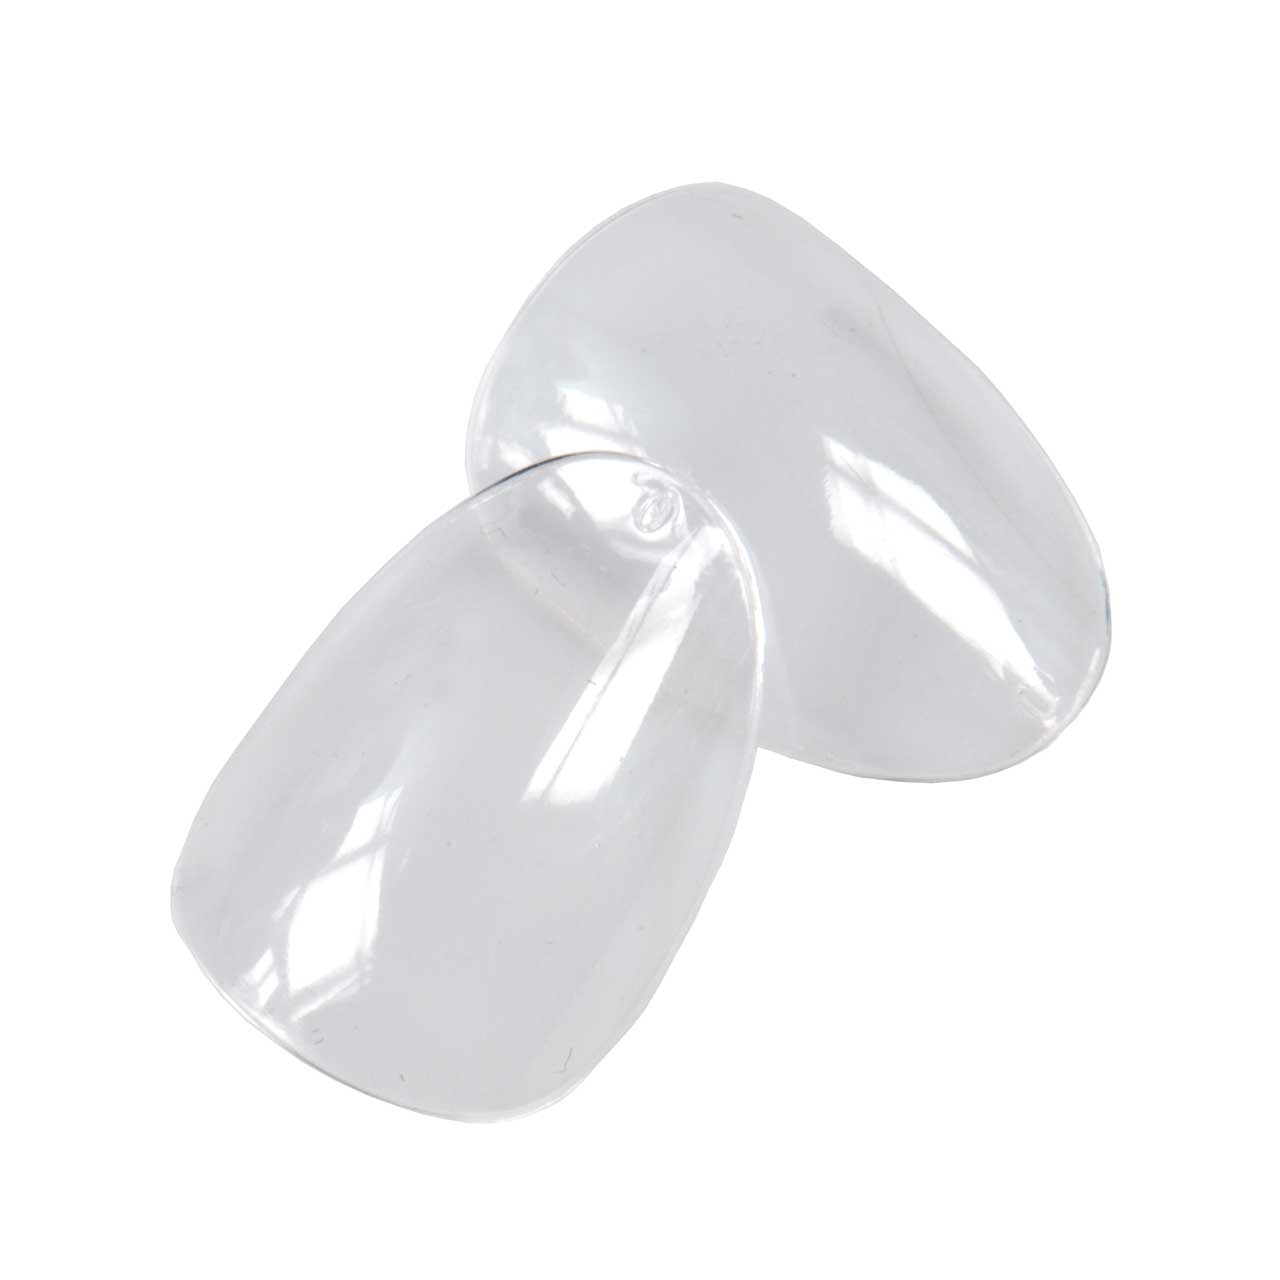 Soft Gel Nail Tips Rounded Almond Shape 500 in Tipbox